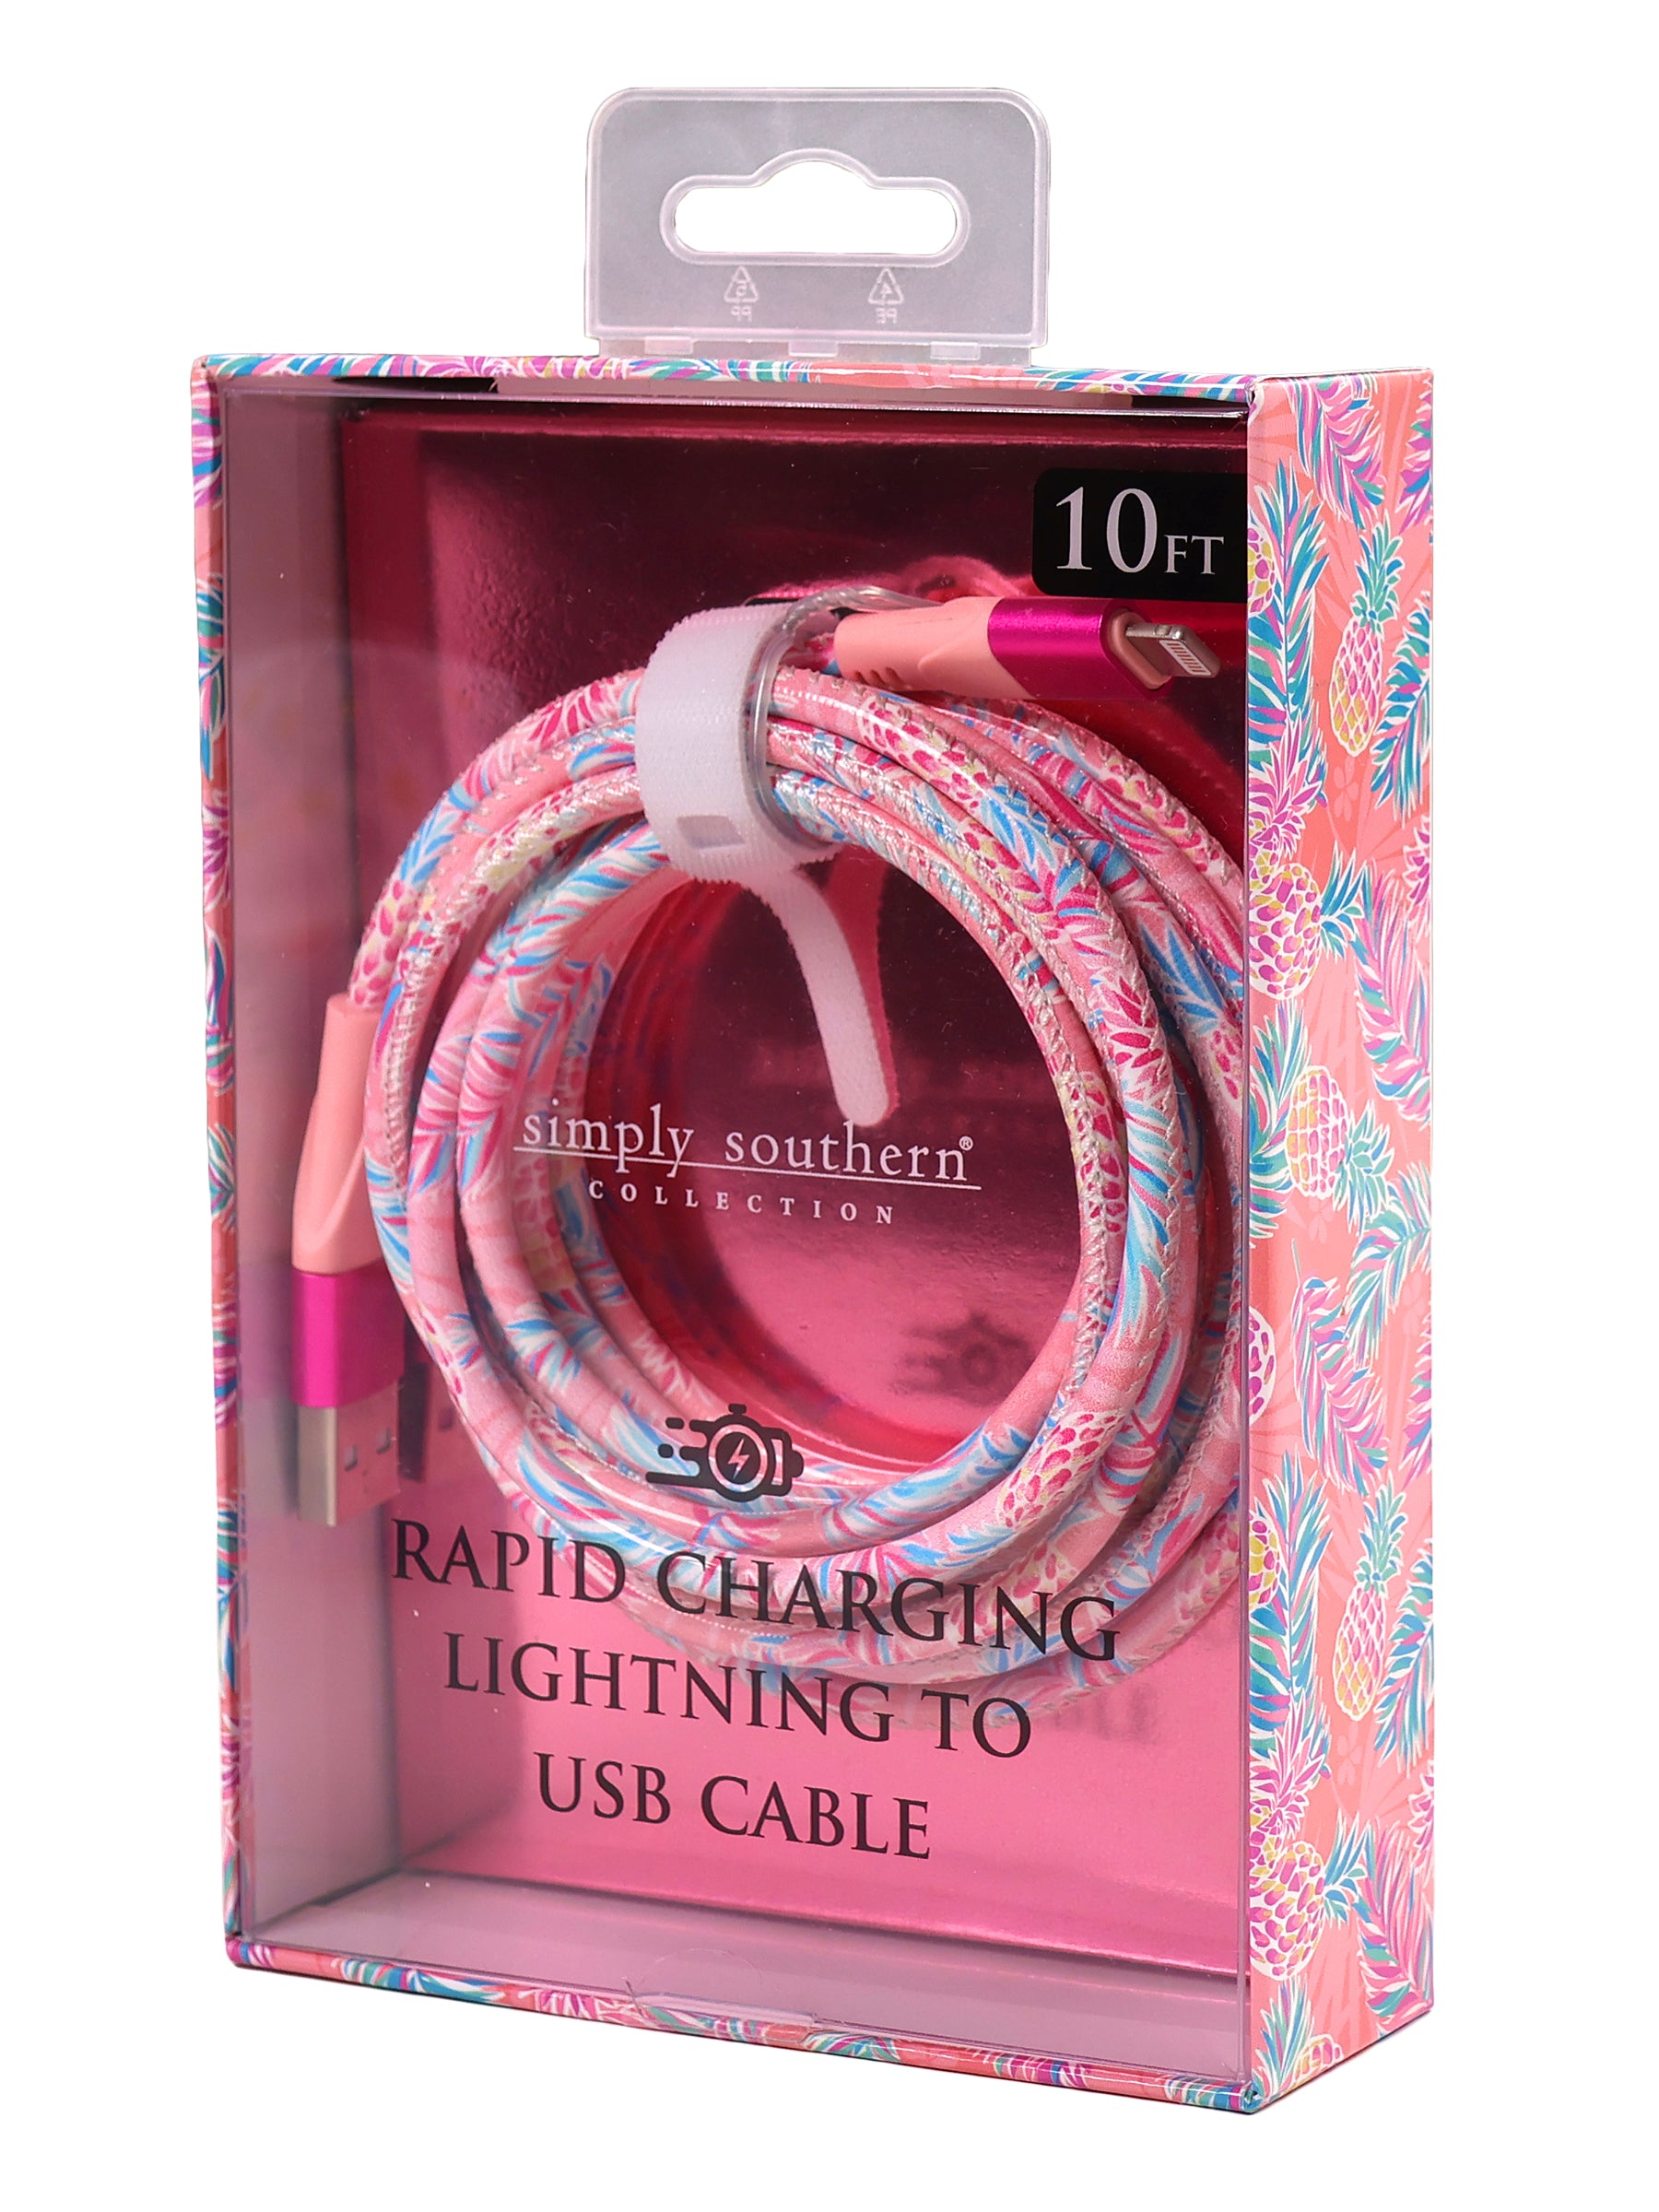 10FT CHARGING CABLE